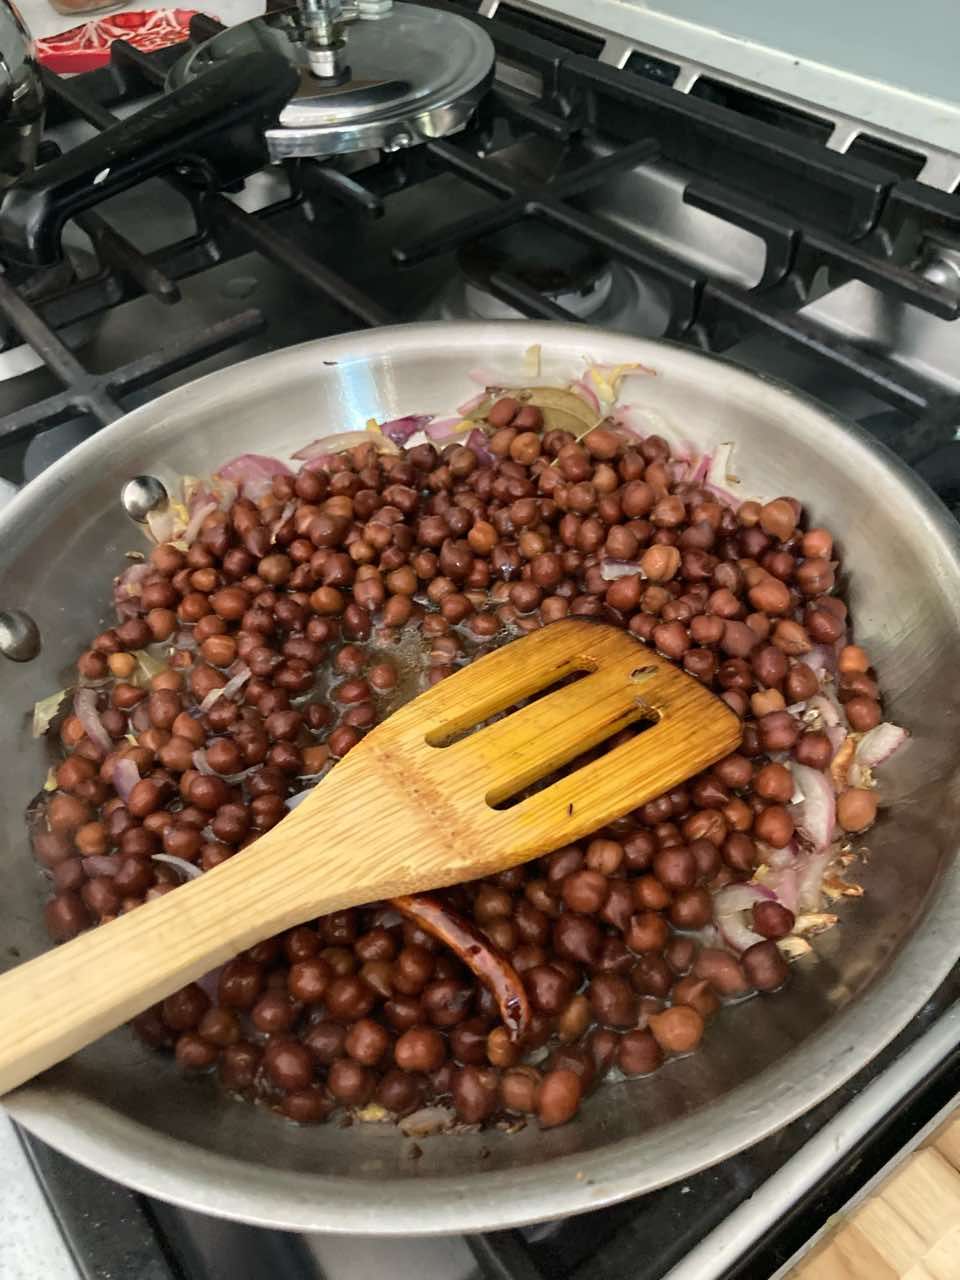 Sauteed chickpeas in process